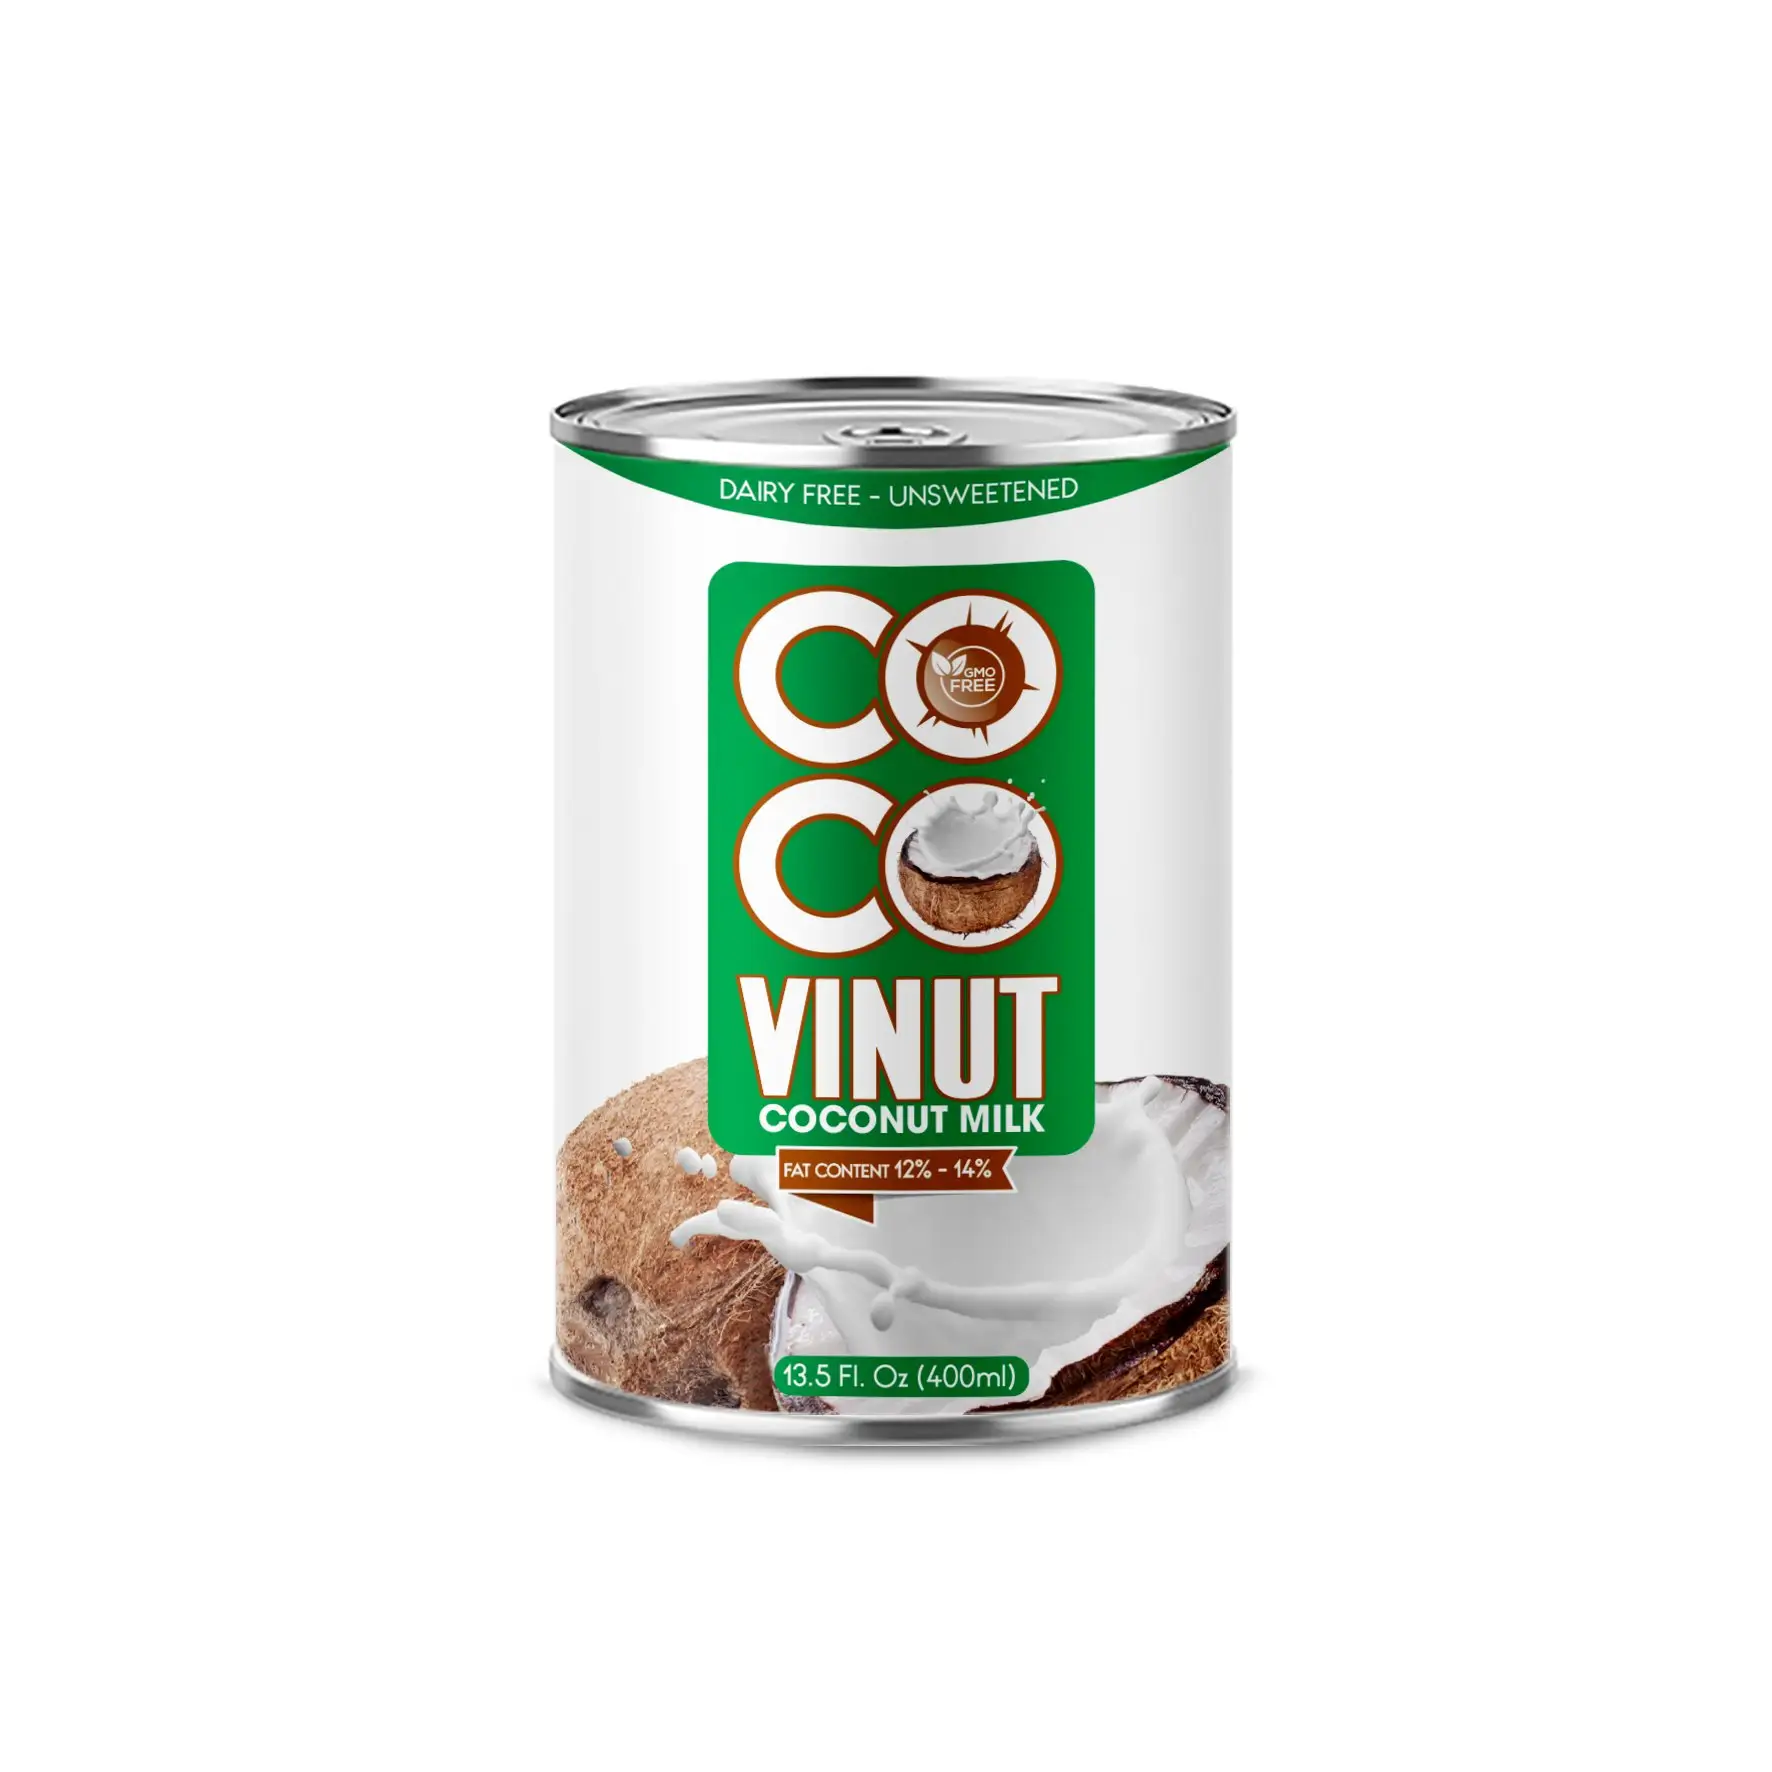 200ml Can (Tinned) Coconut Milk for cooking 12-14% Fat UHT Gluten Free and Vegan Product with Halal